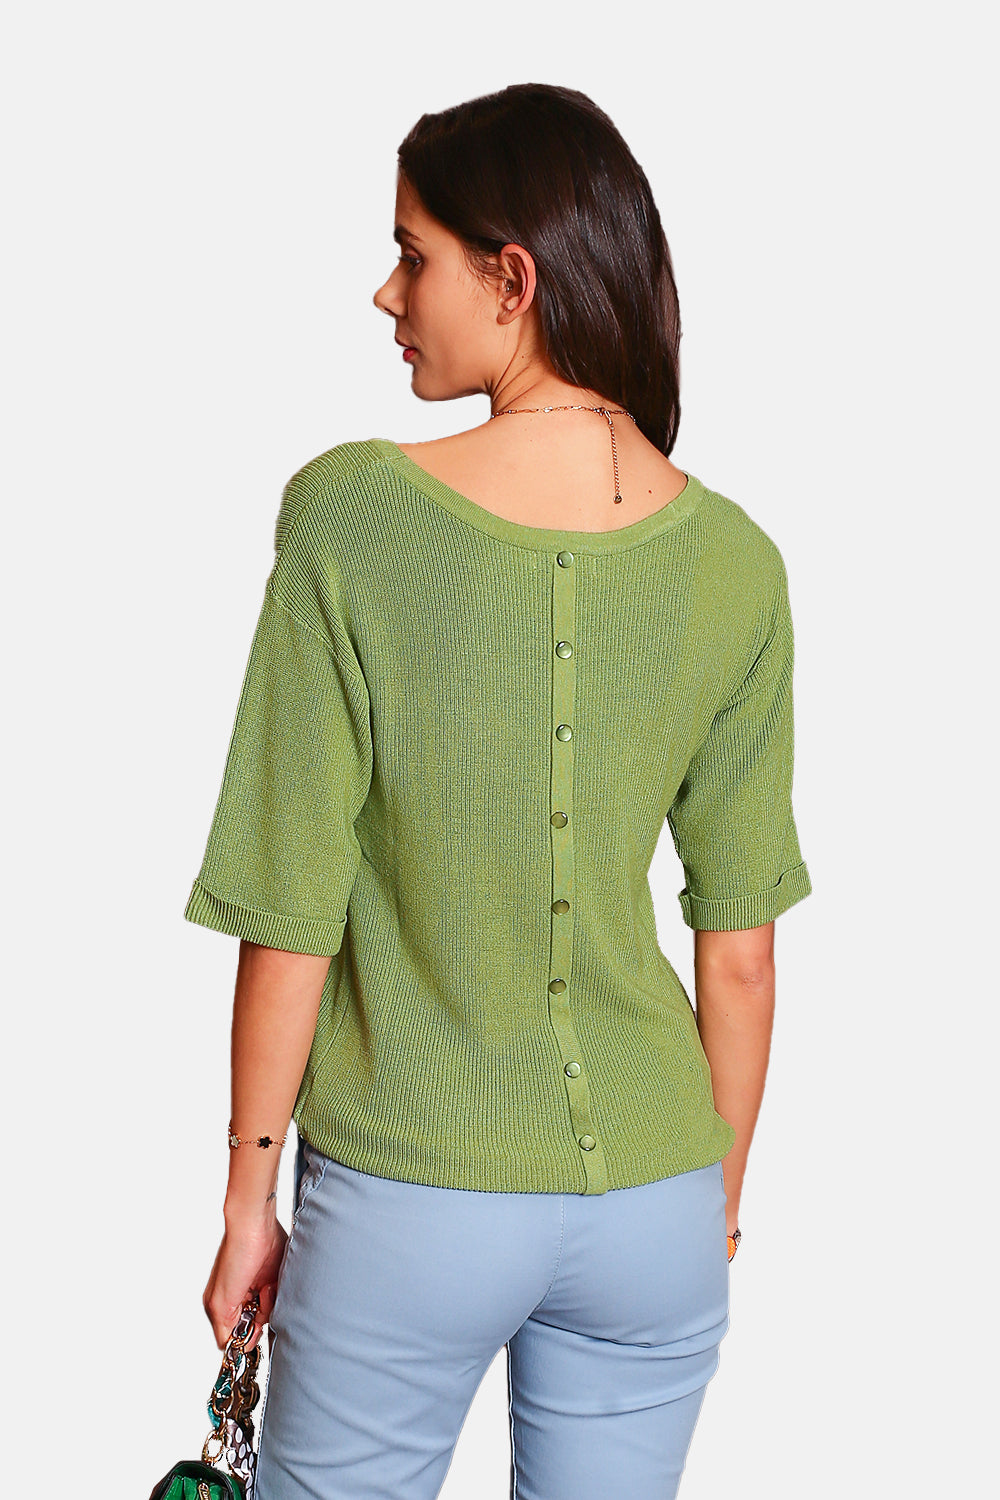 Boat neck jumper with short sleeves back button to wear two ways